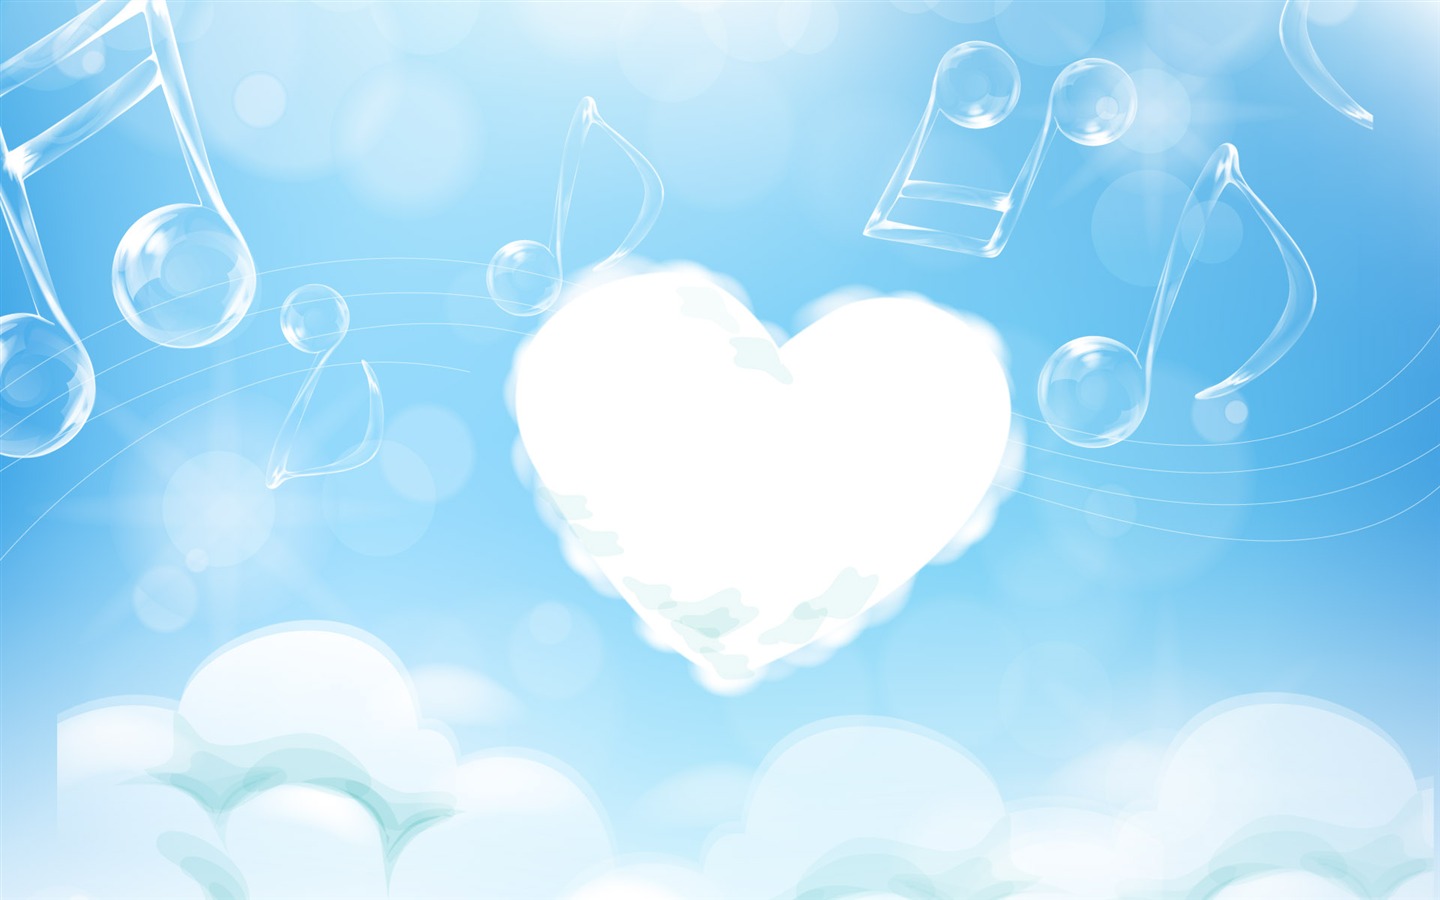 Valentine's Day Love Theme Wallpapers (3) #2 - 1440x900